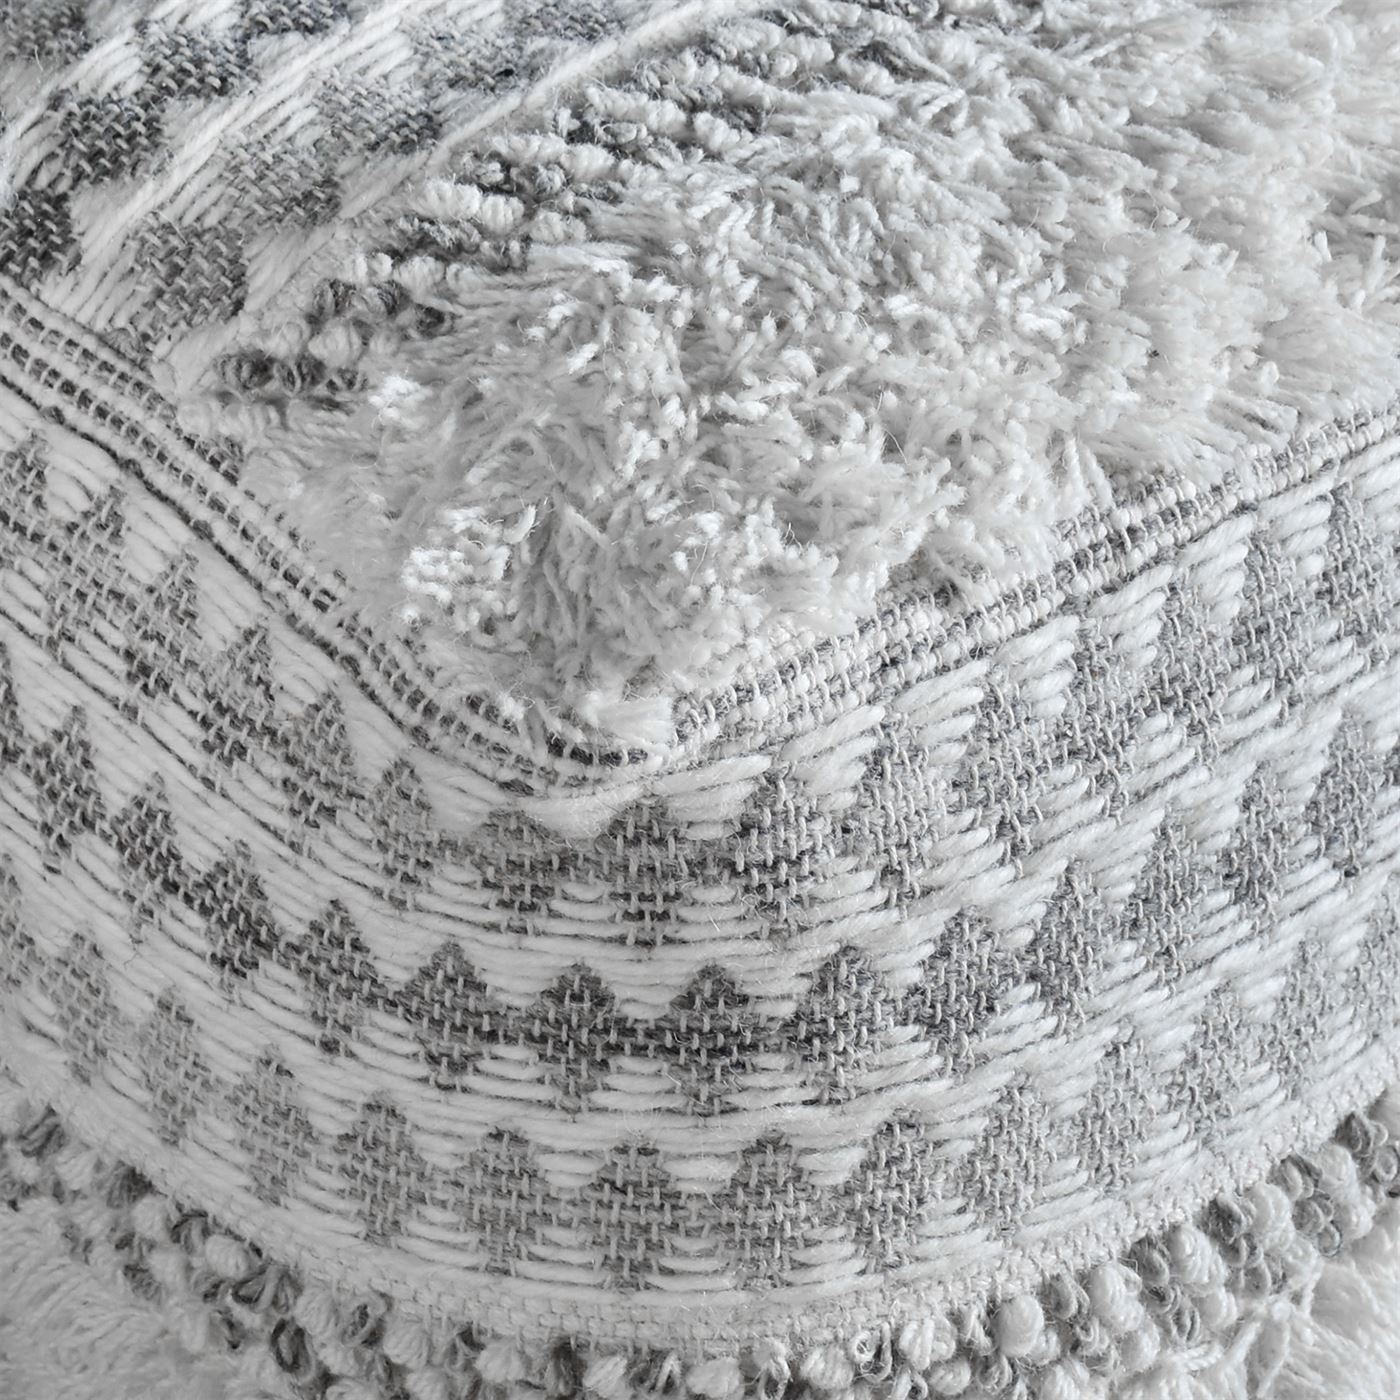 Obidos Pouf, Wool, Cotton, Natural White,Grey, Pitloom, Cut And Loop 